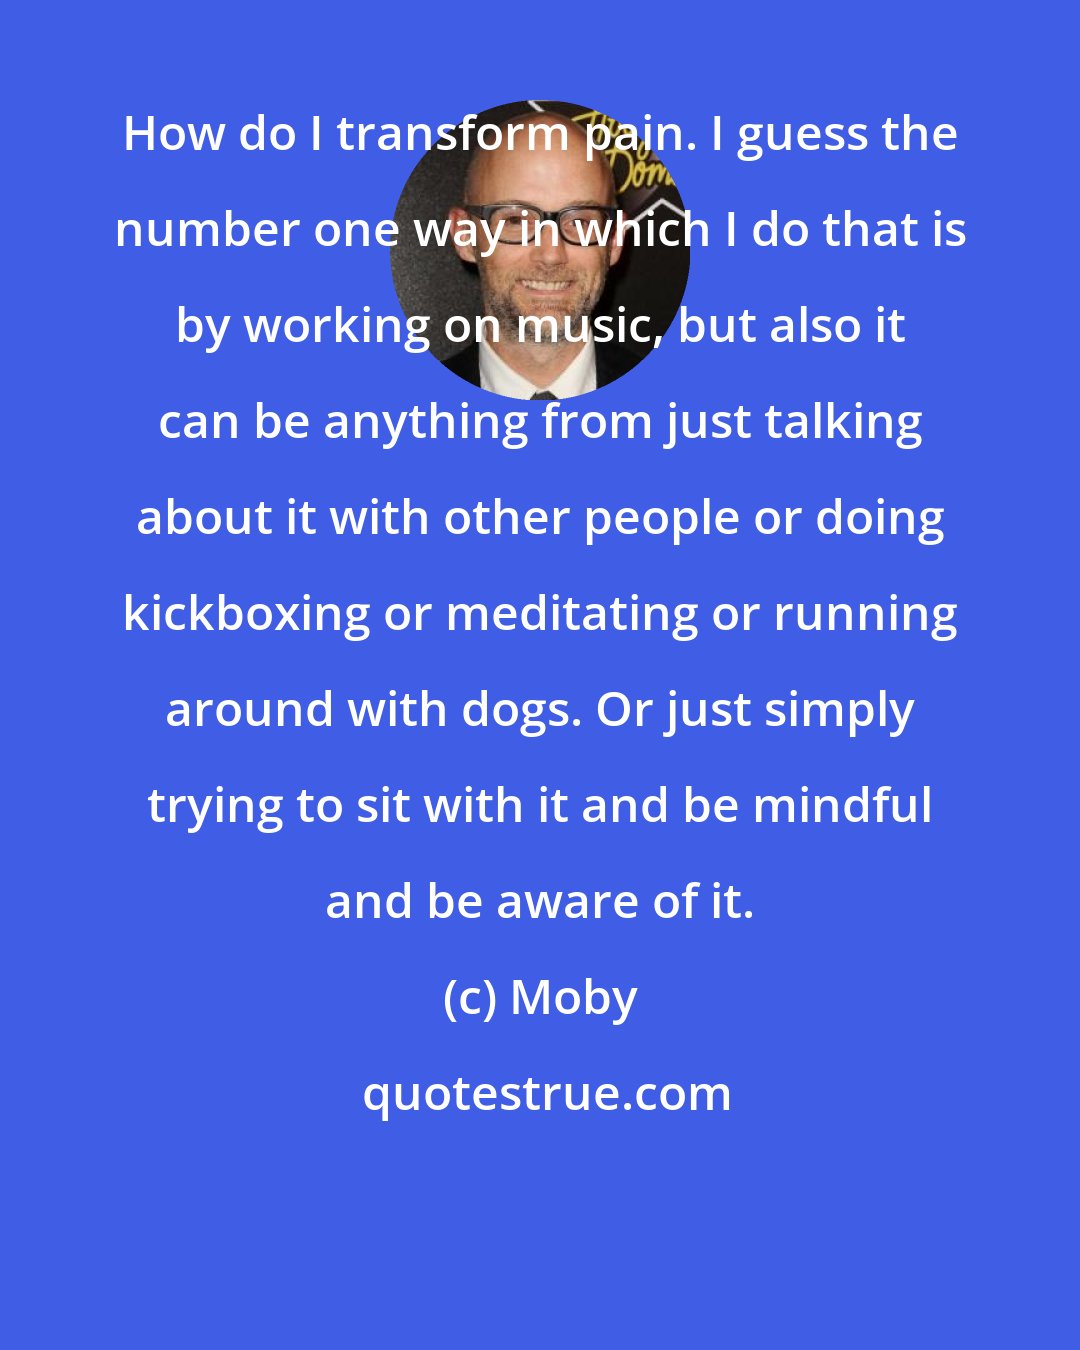 Moby: How do I transform pain. I guess the number one way in which I do that is by working on music, but also it can be anything from just talking about it with other people or doing kickboxing or meditating or running around with dogs. Or just simply trying to sit with it and be mindful and be aware of it.